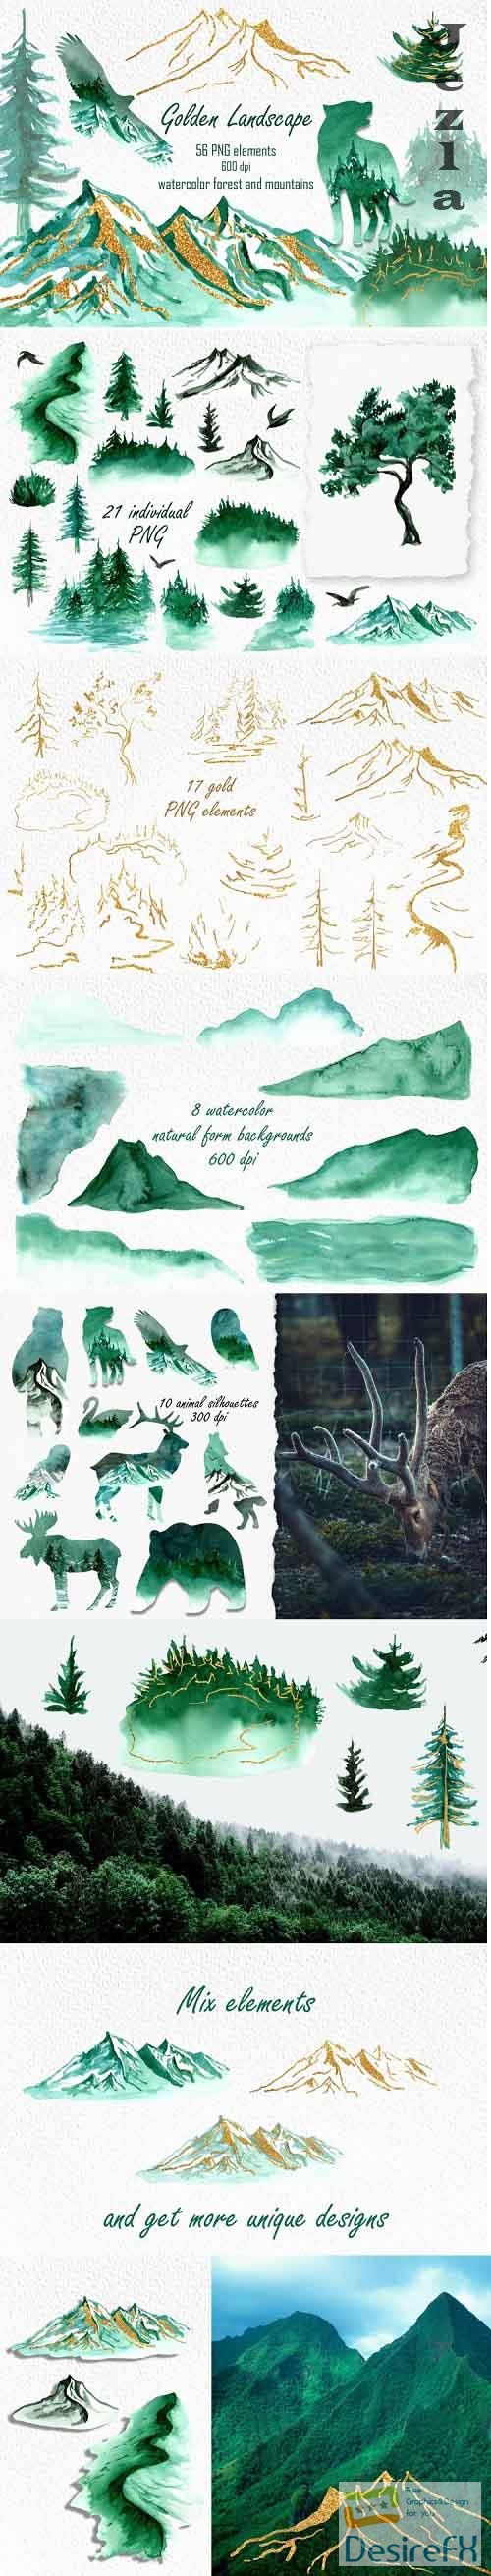 Watercolor landscape clipart, Forest animal silhouettes PNG - 1176802